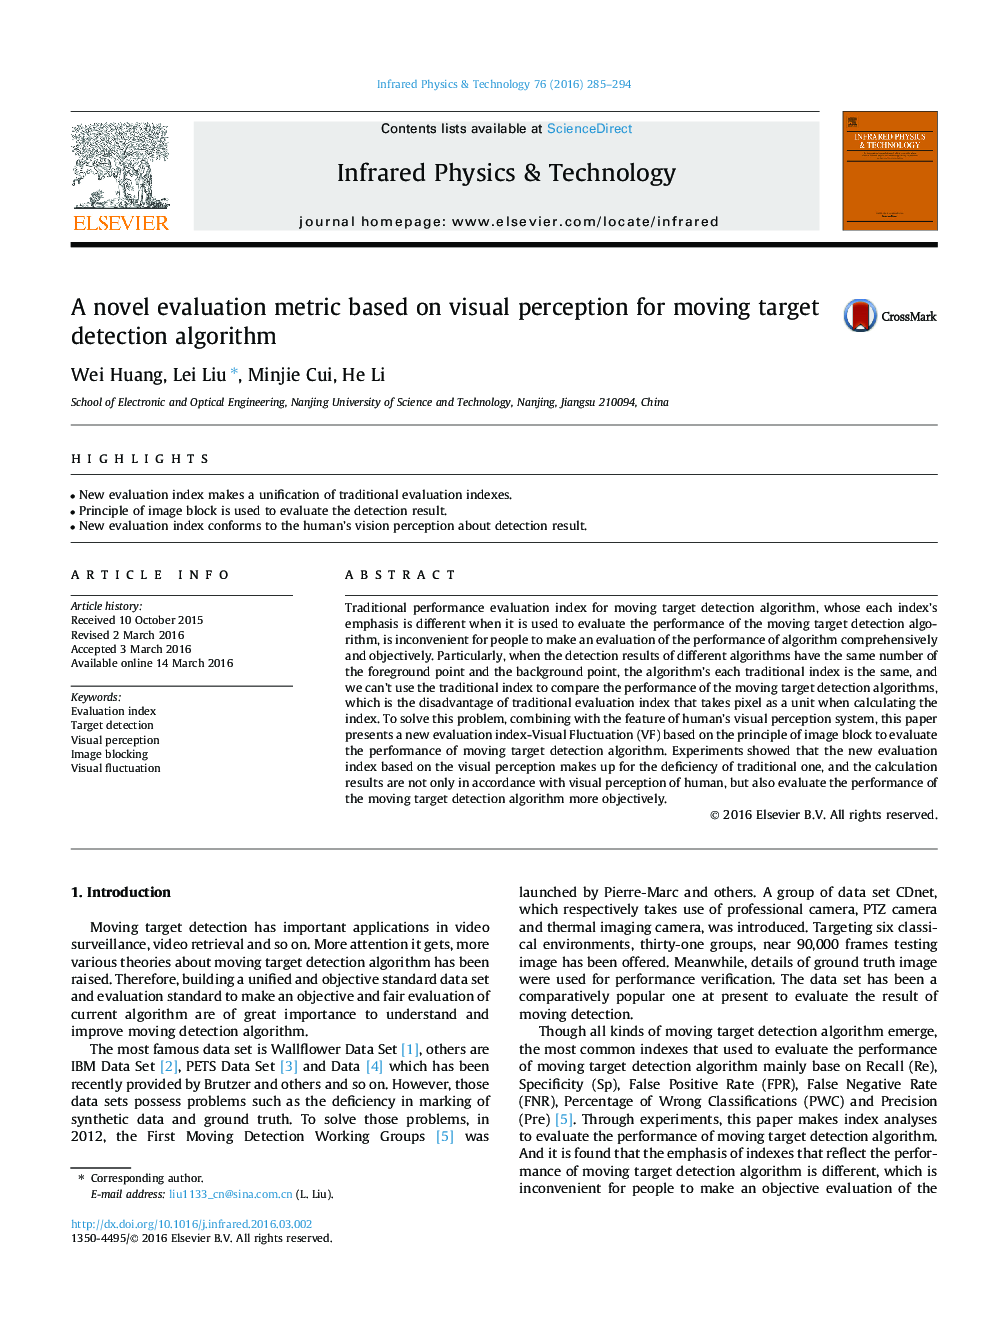 A novel evaluation metric based on visual perception for moving target detection algorithm